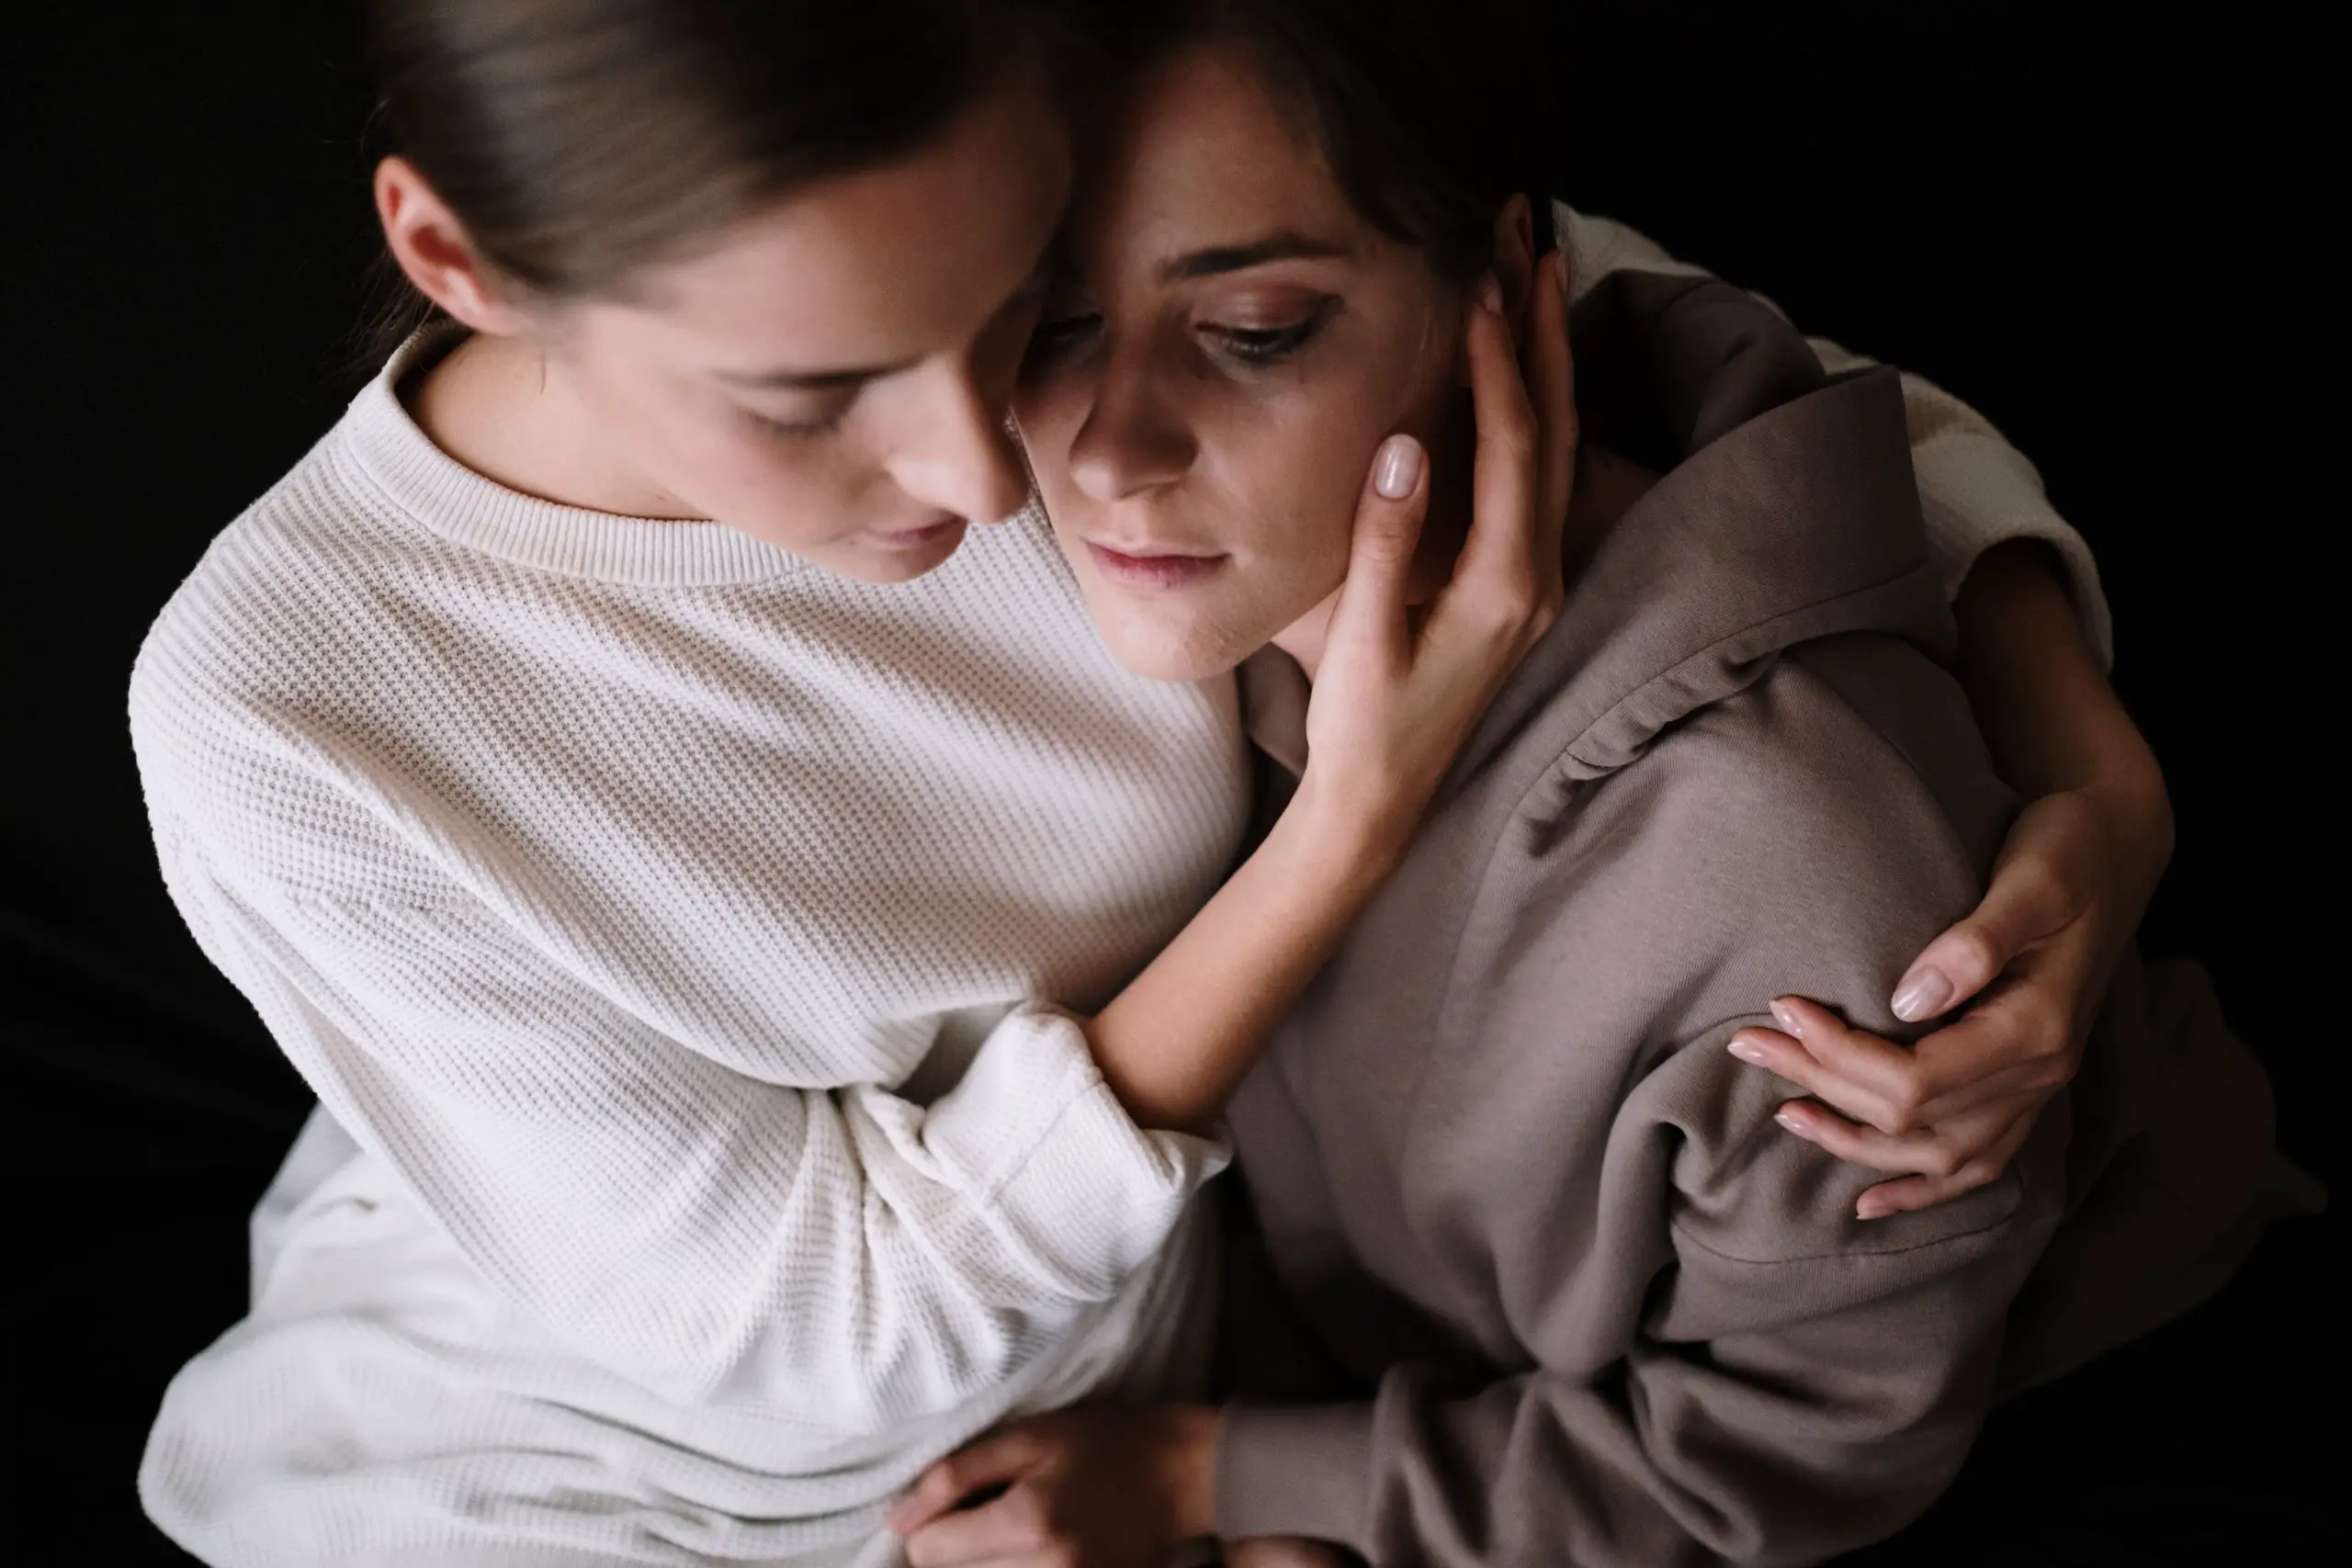 One woman consoling and hugging her girlfriend